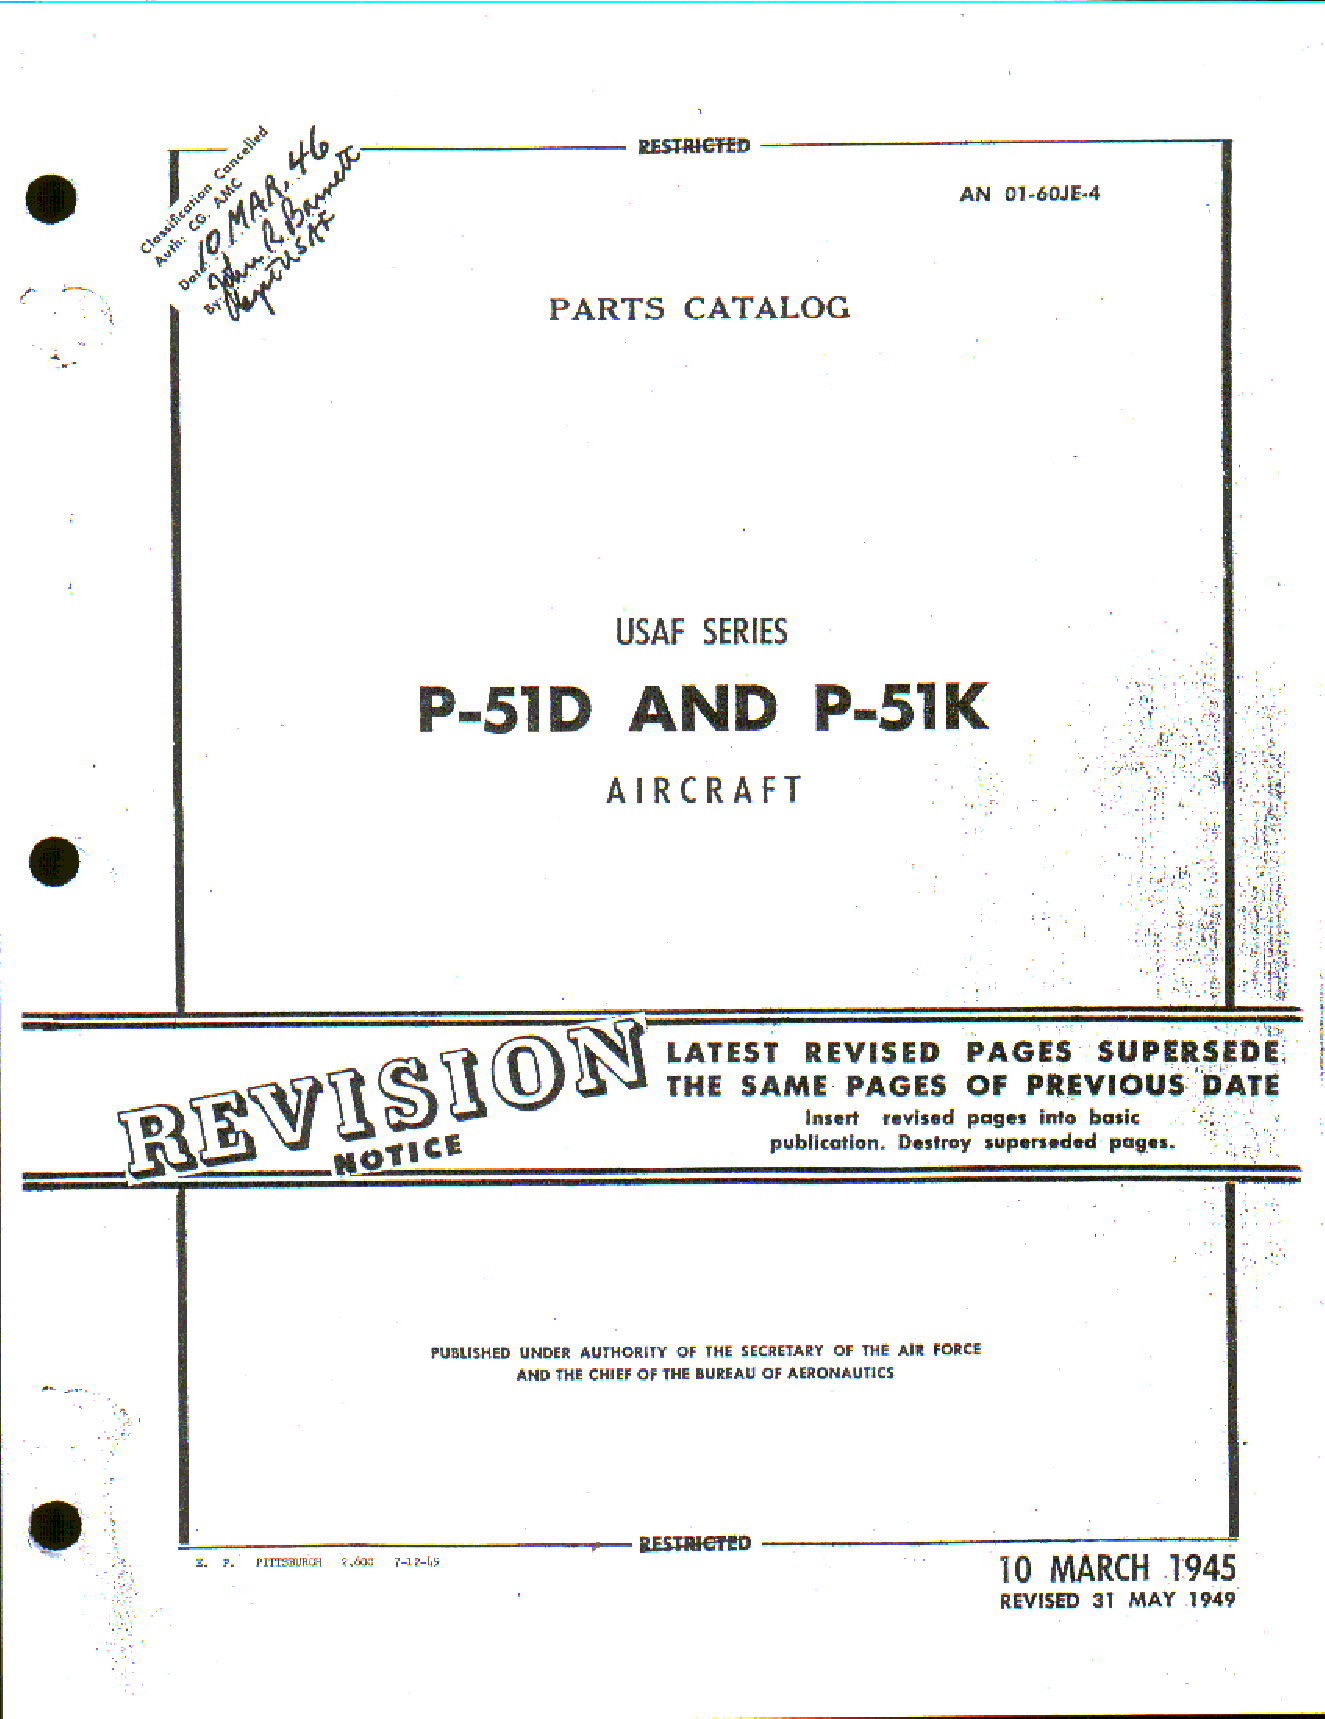 Sample page 1 from AirCorps Library document: Parts Catalog for P-51D and P-51K Aircraft